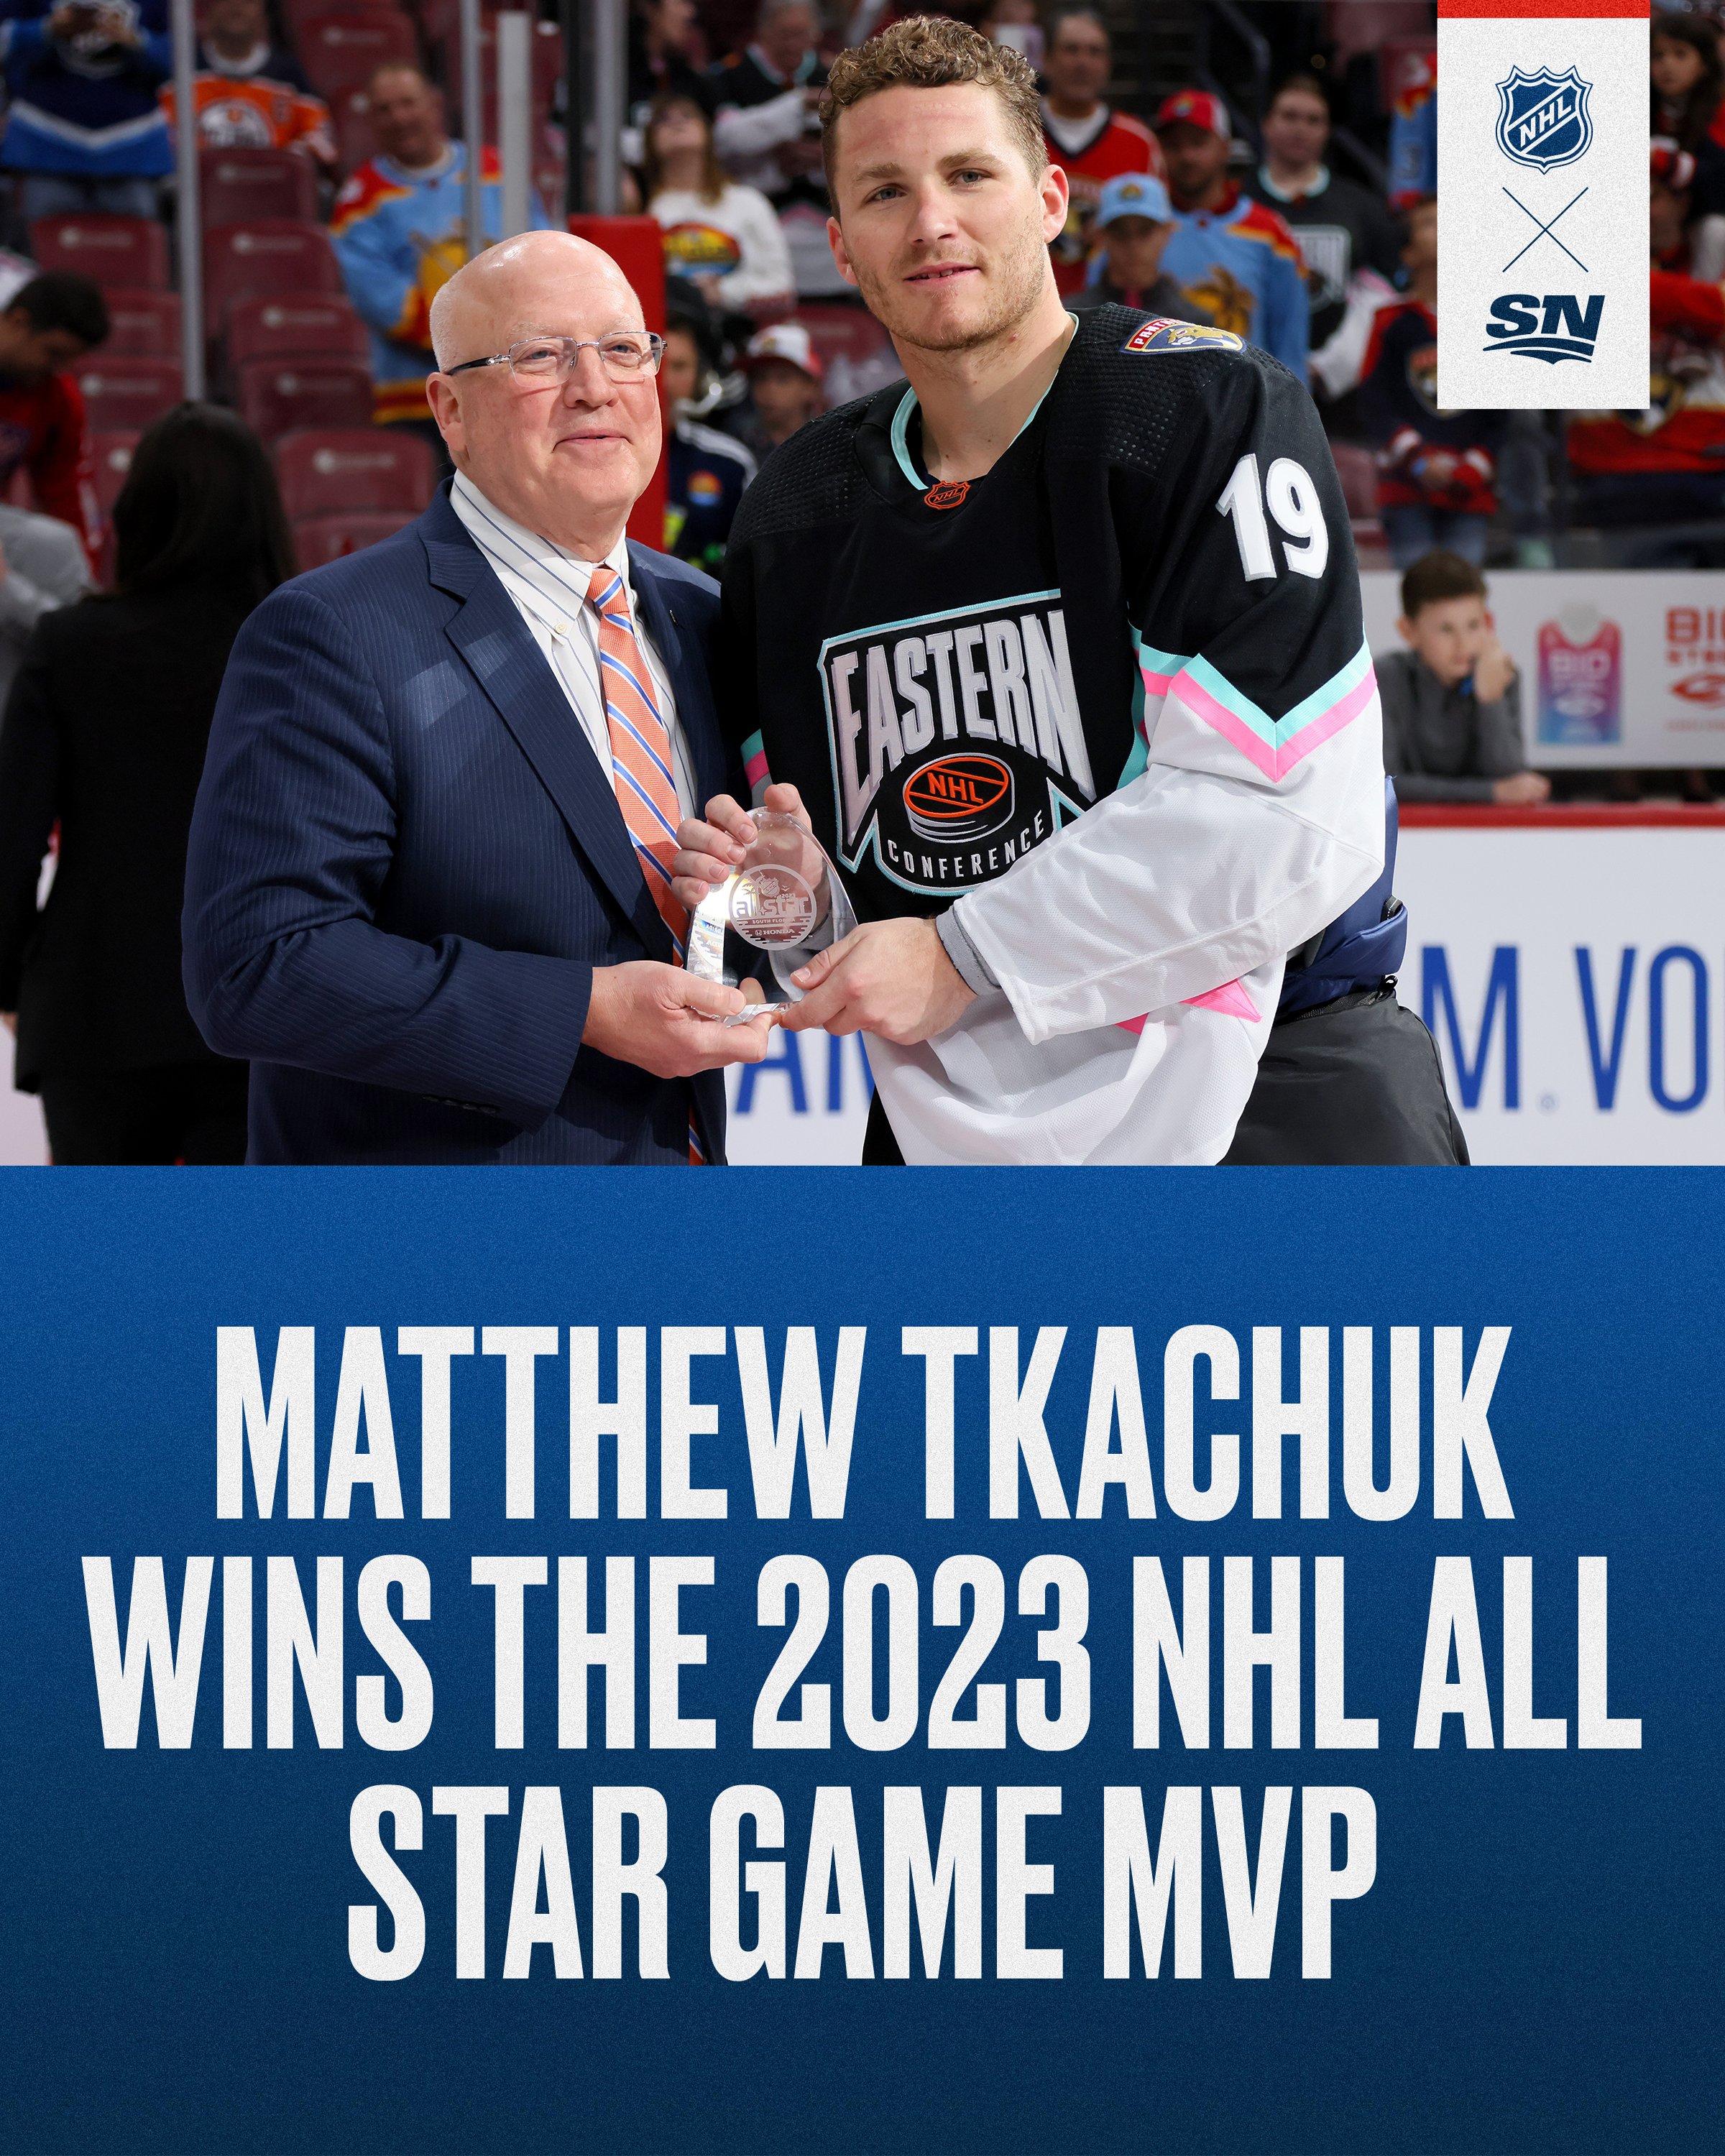 Tkachuk Brothers Celebrated by Fans as MVPs After Dominating 2023